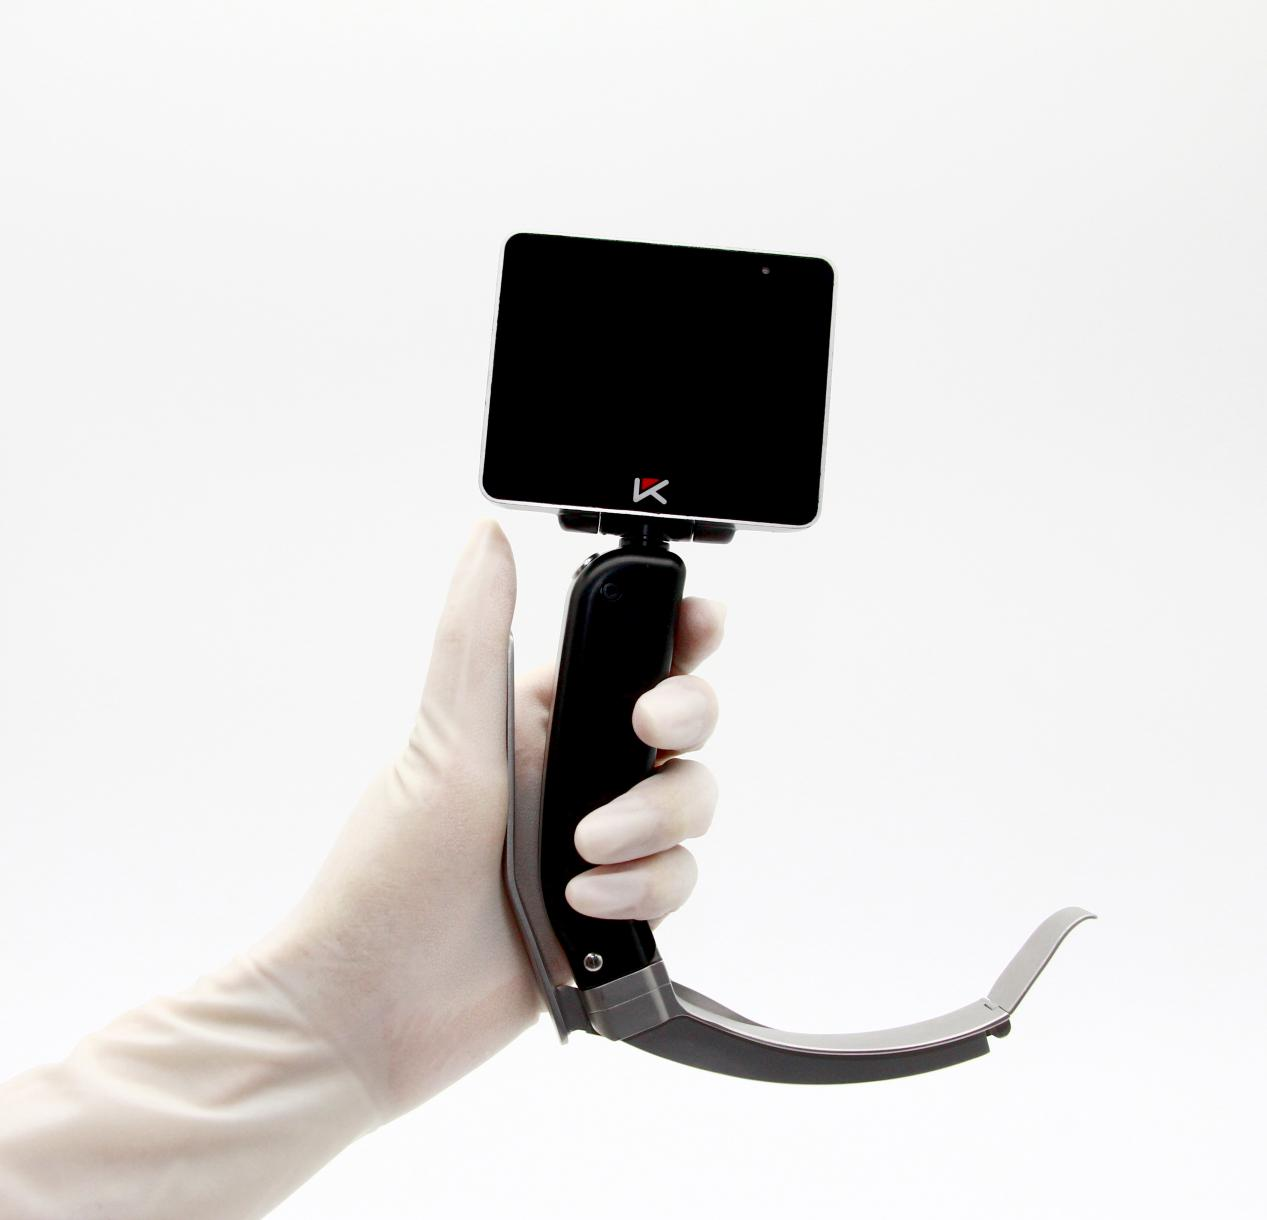 Anesthesia Video Laryngoscope: See Clearly